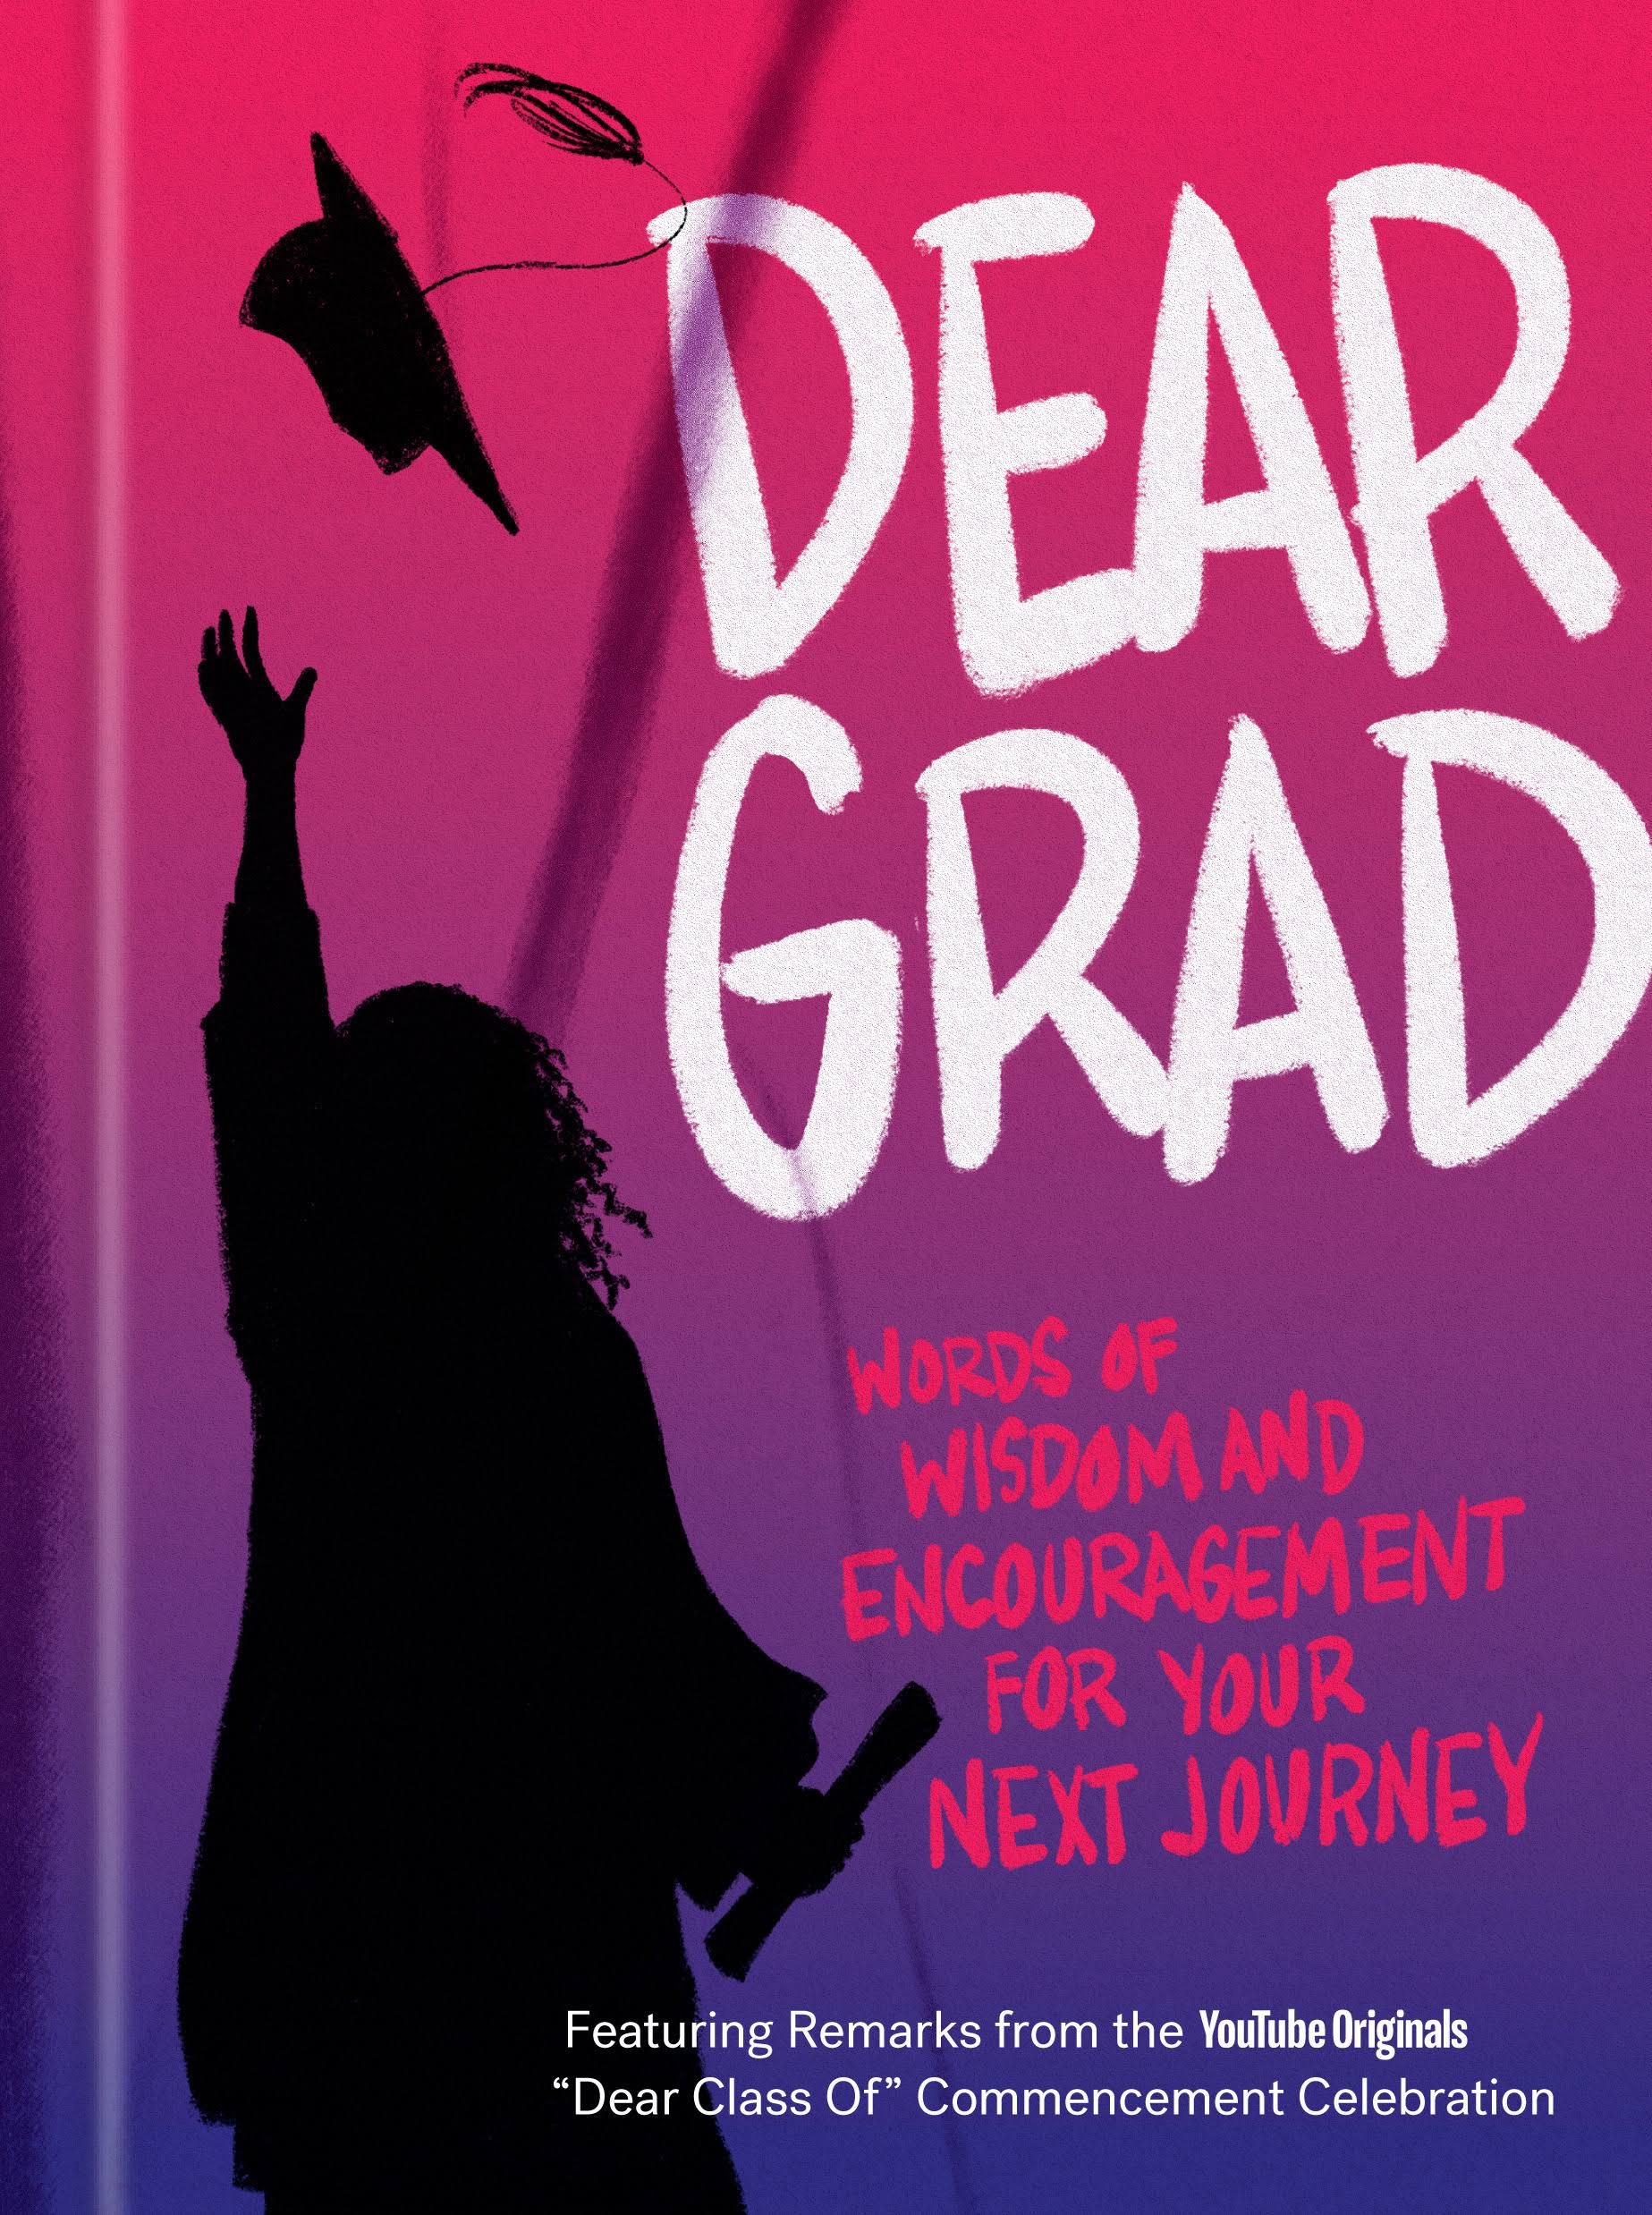 Dear Grad: Words of Wisdom and Encouragement for Your Next Journey [Book]